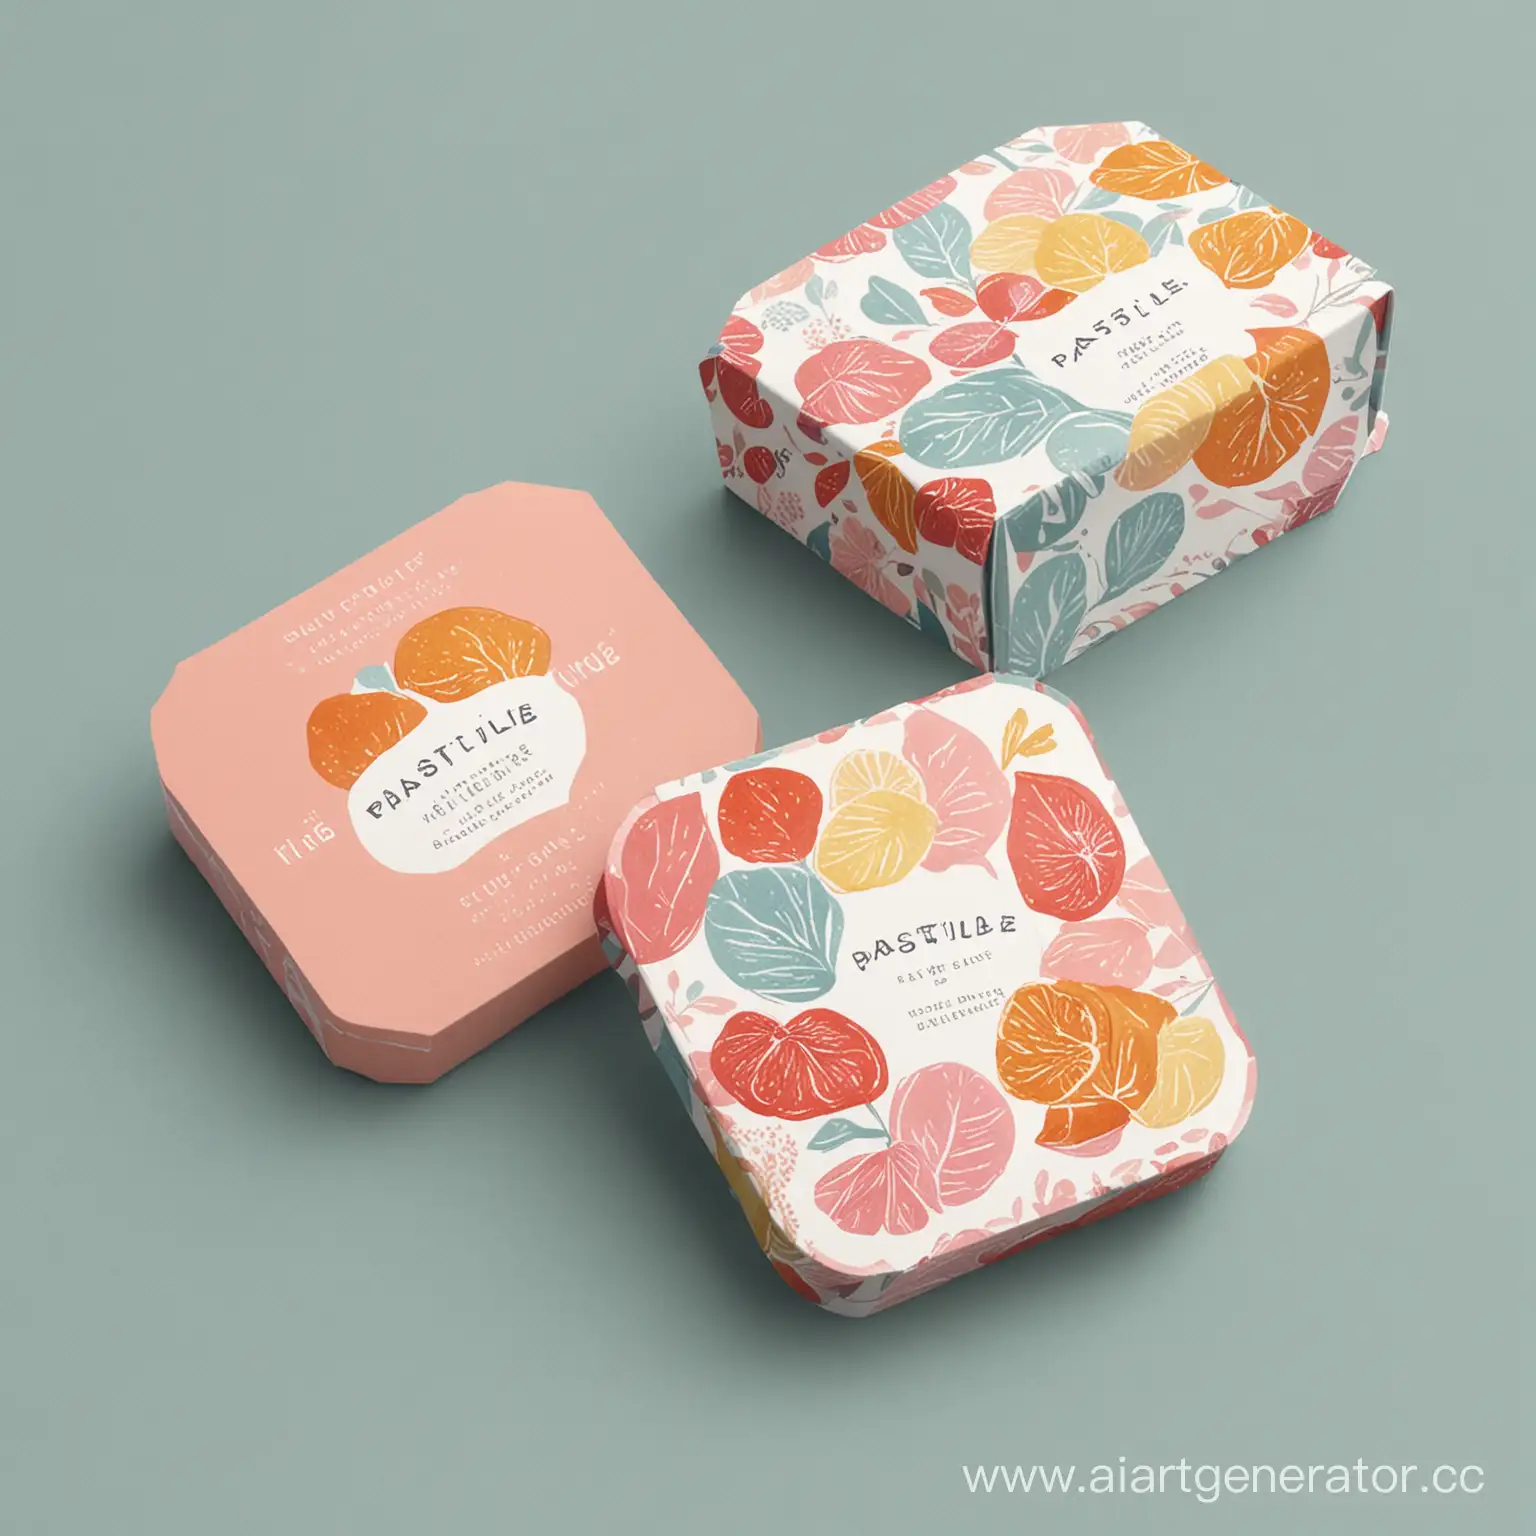 Elegant-Pastille-Candy-Packaging-with-Vibrant-Colors-and-Chic-Design